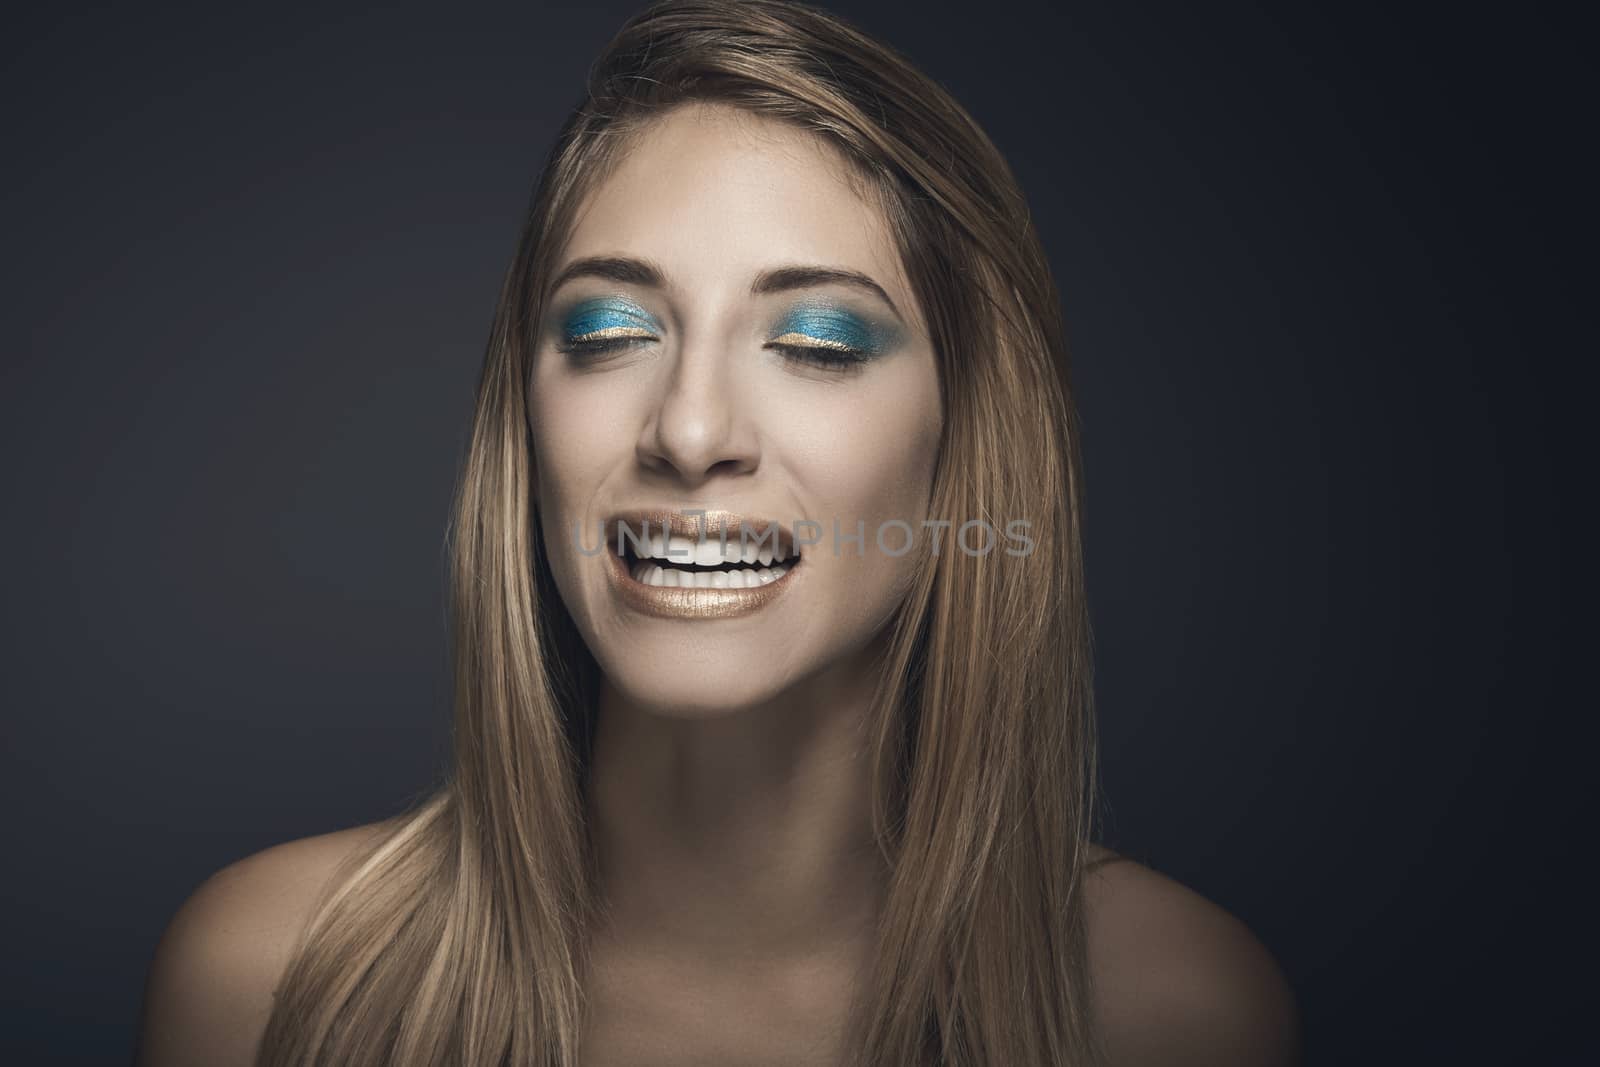 Beauty portrait of young sexy woman against blue background